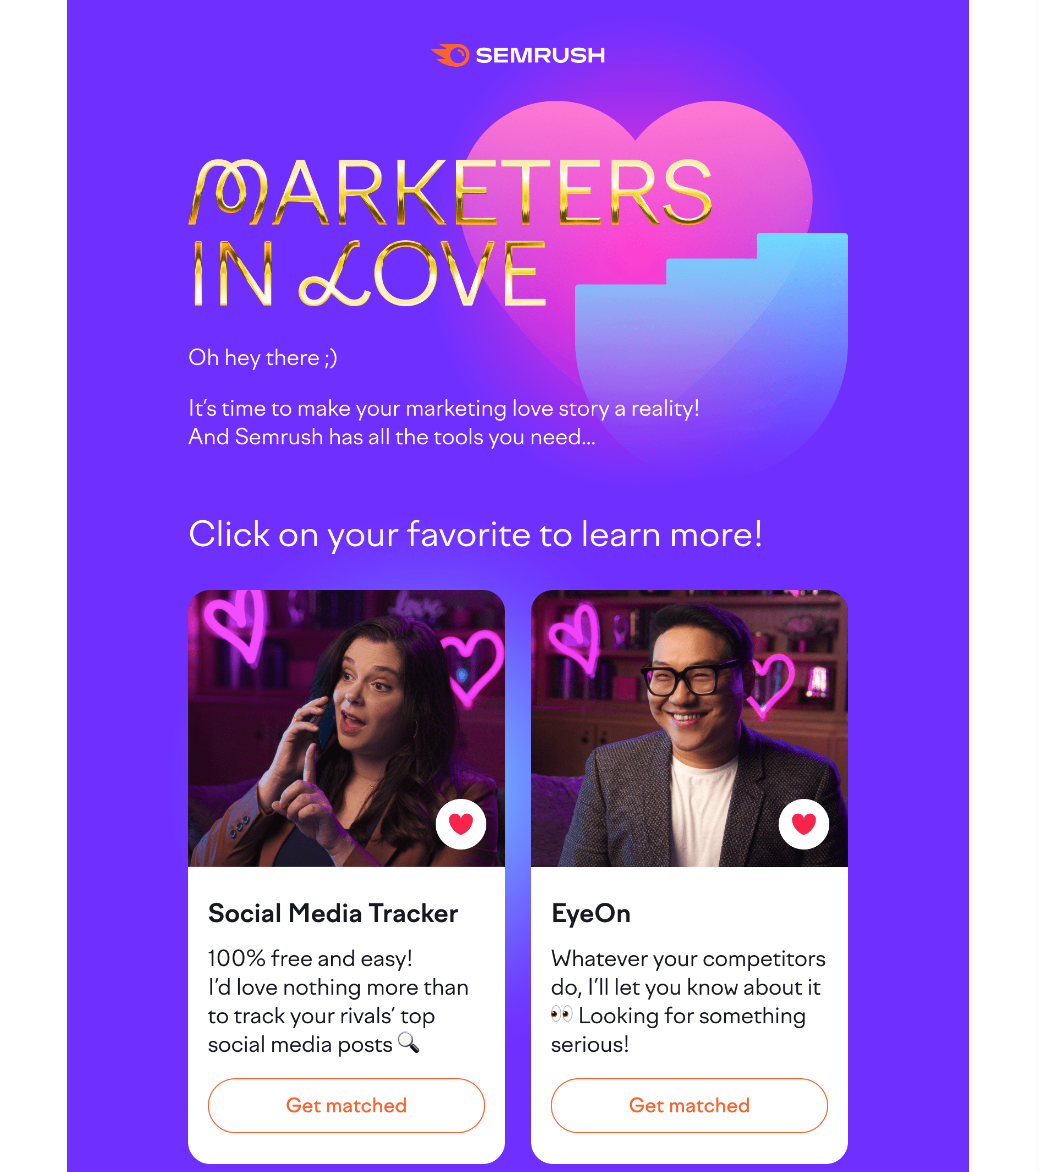 17 Valentine's Day Email Marketing Tips and Examples - MailerLite